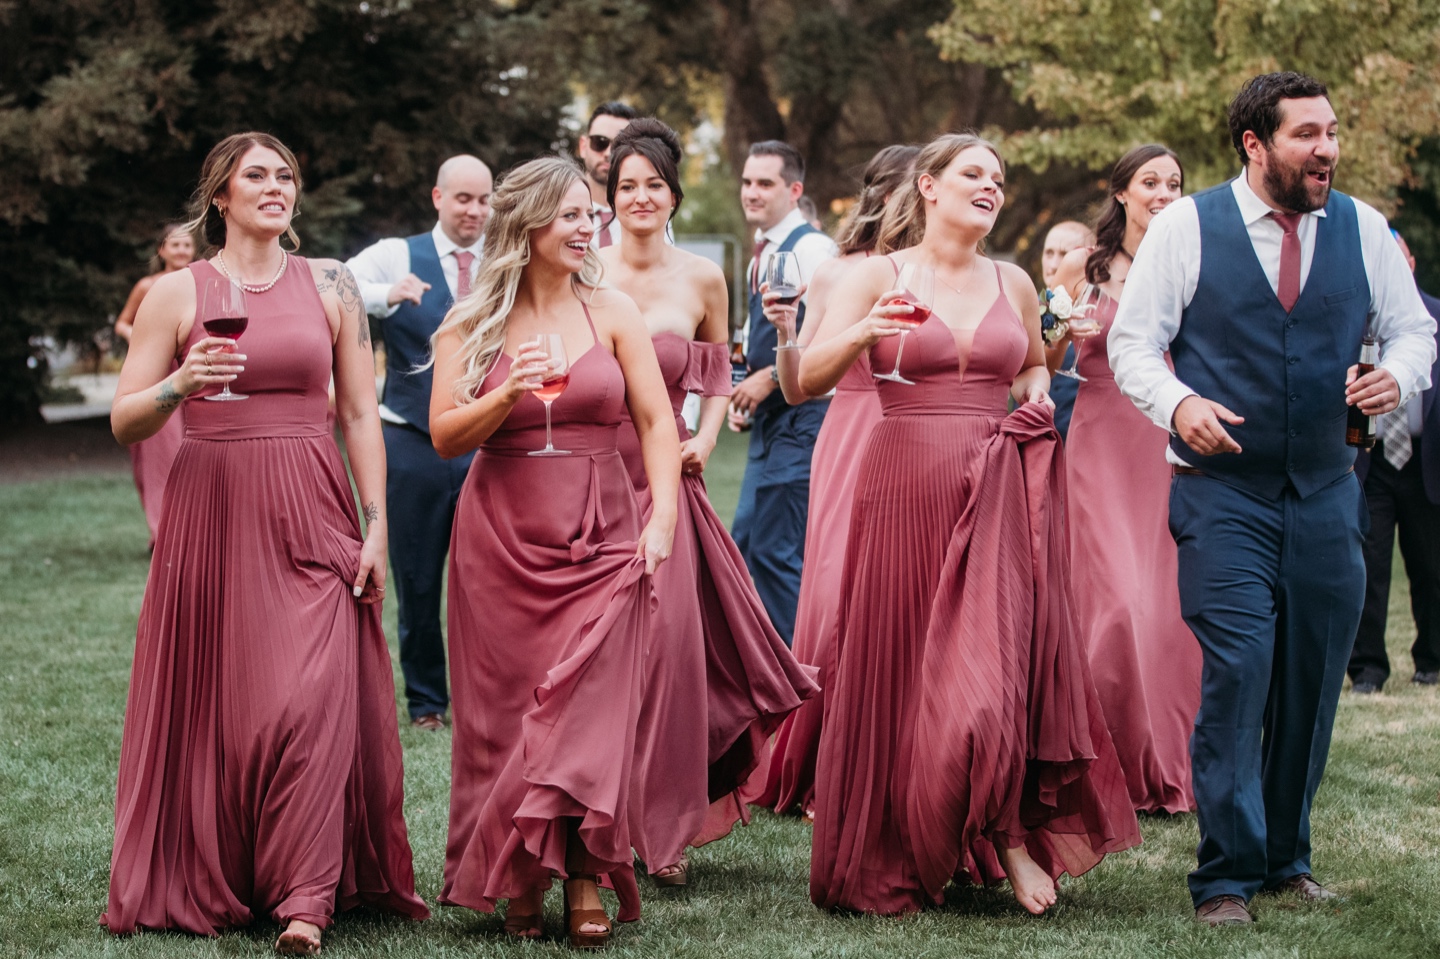 Bridal party walk into the wedding reception holding glasses of wine and beer.